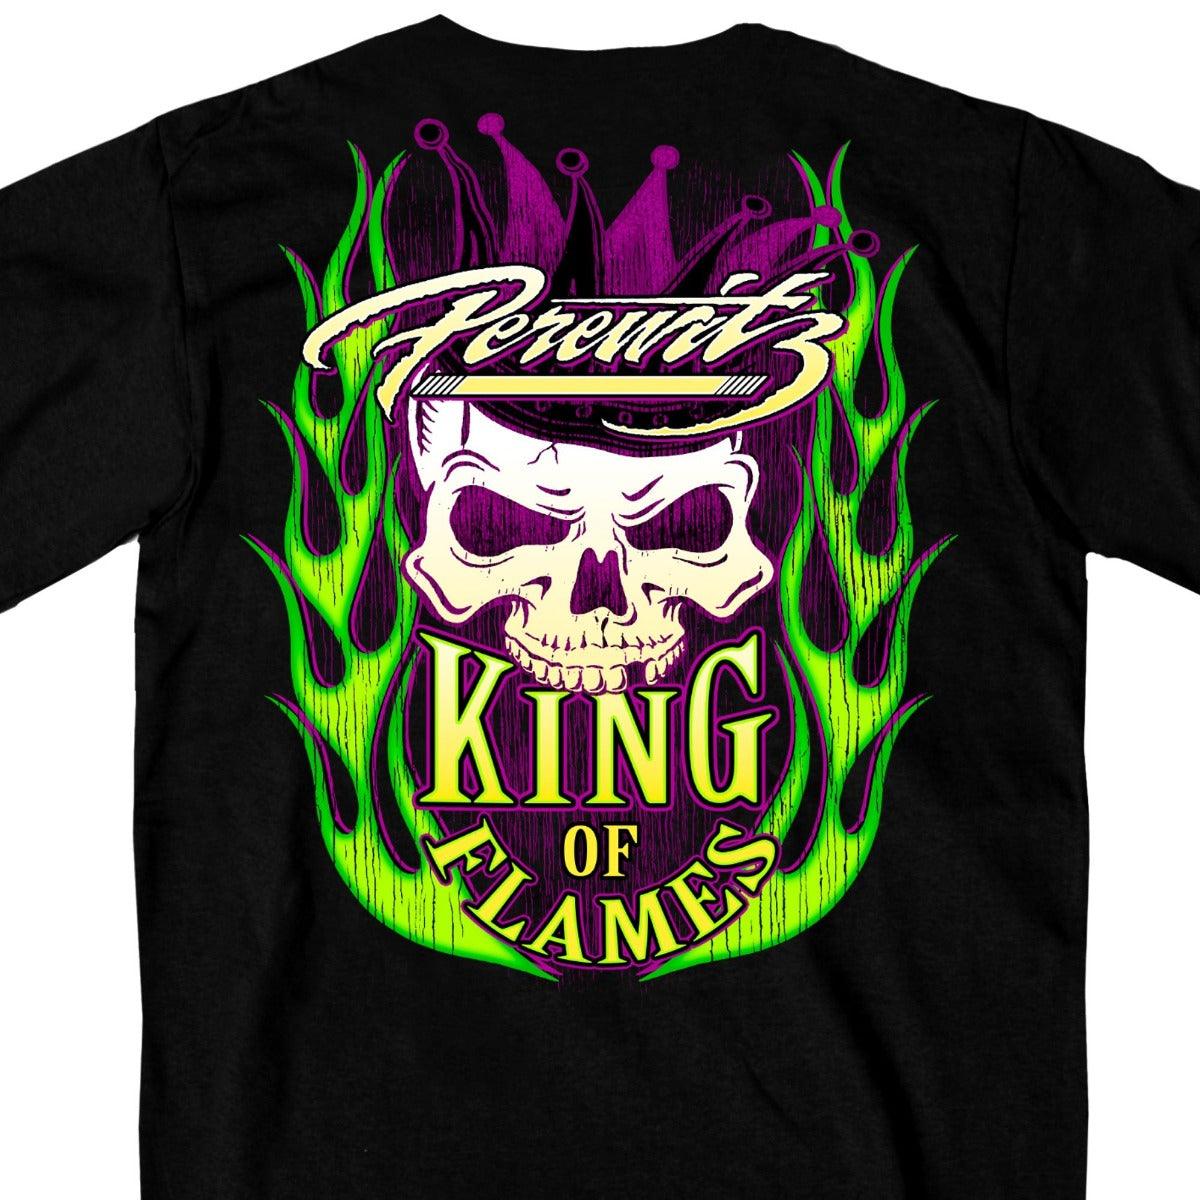 Hot Leathers Men's Official Perewitz King Of Flames T Shirt - American Legend Rider